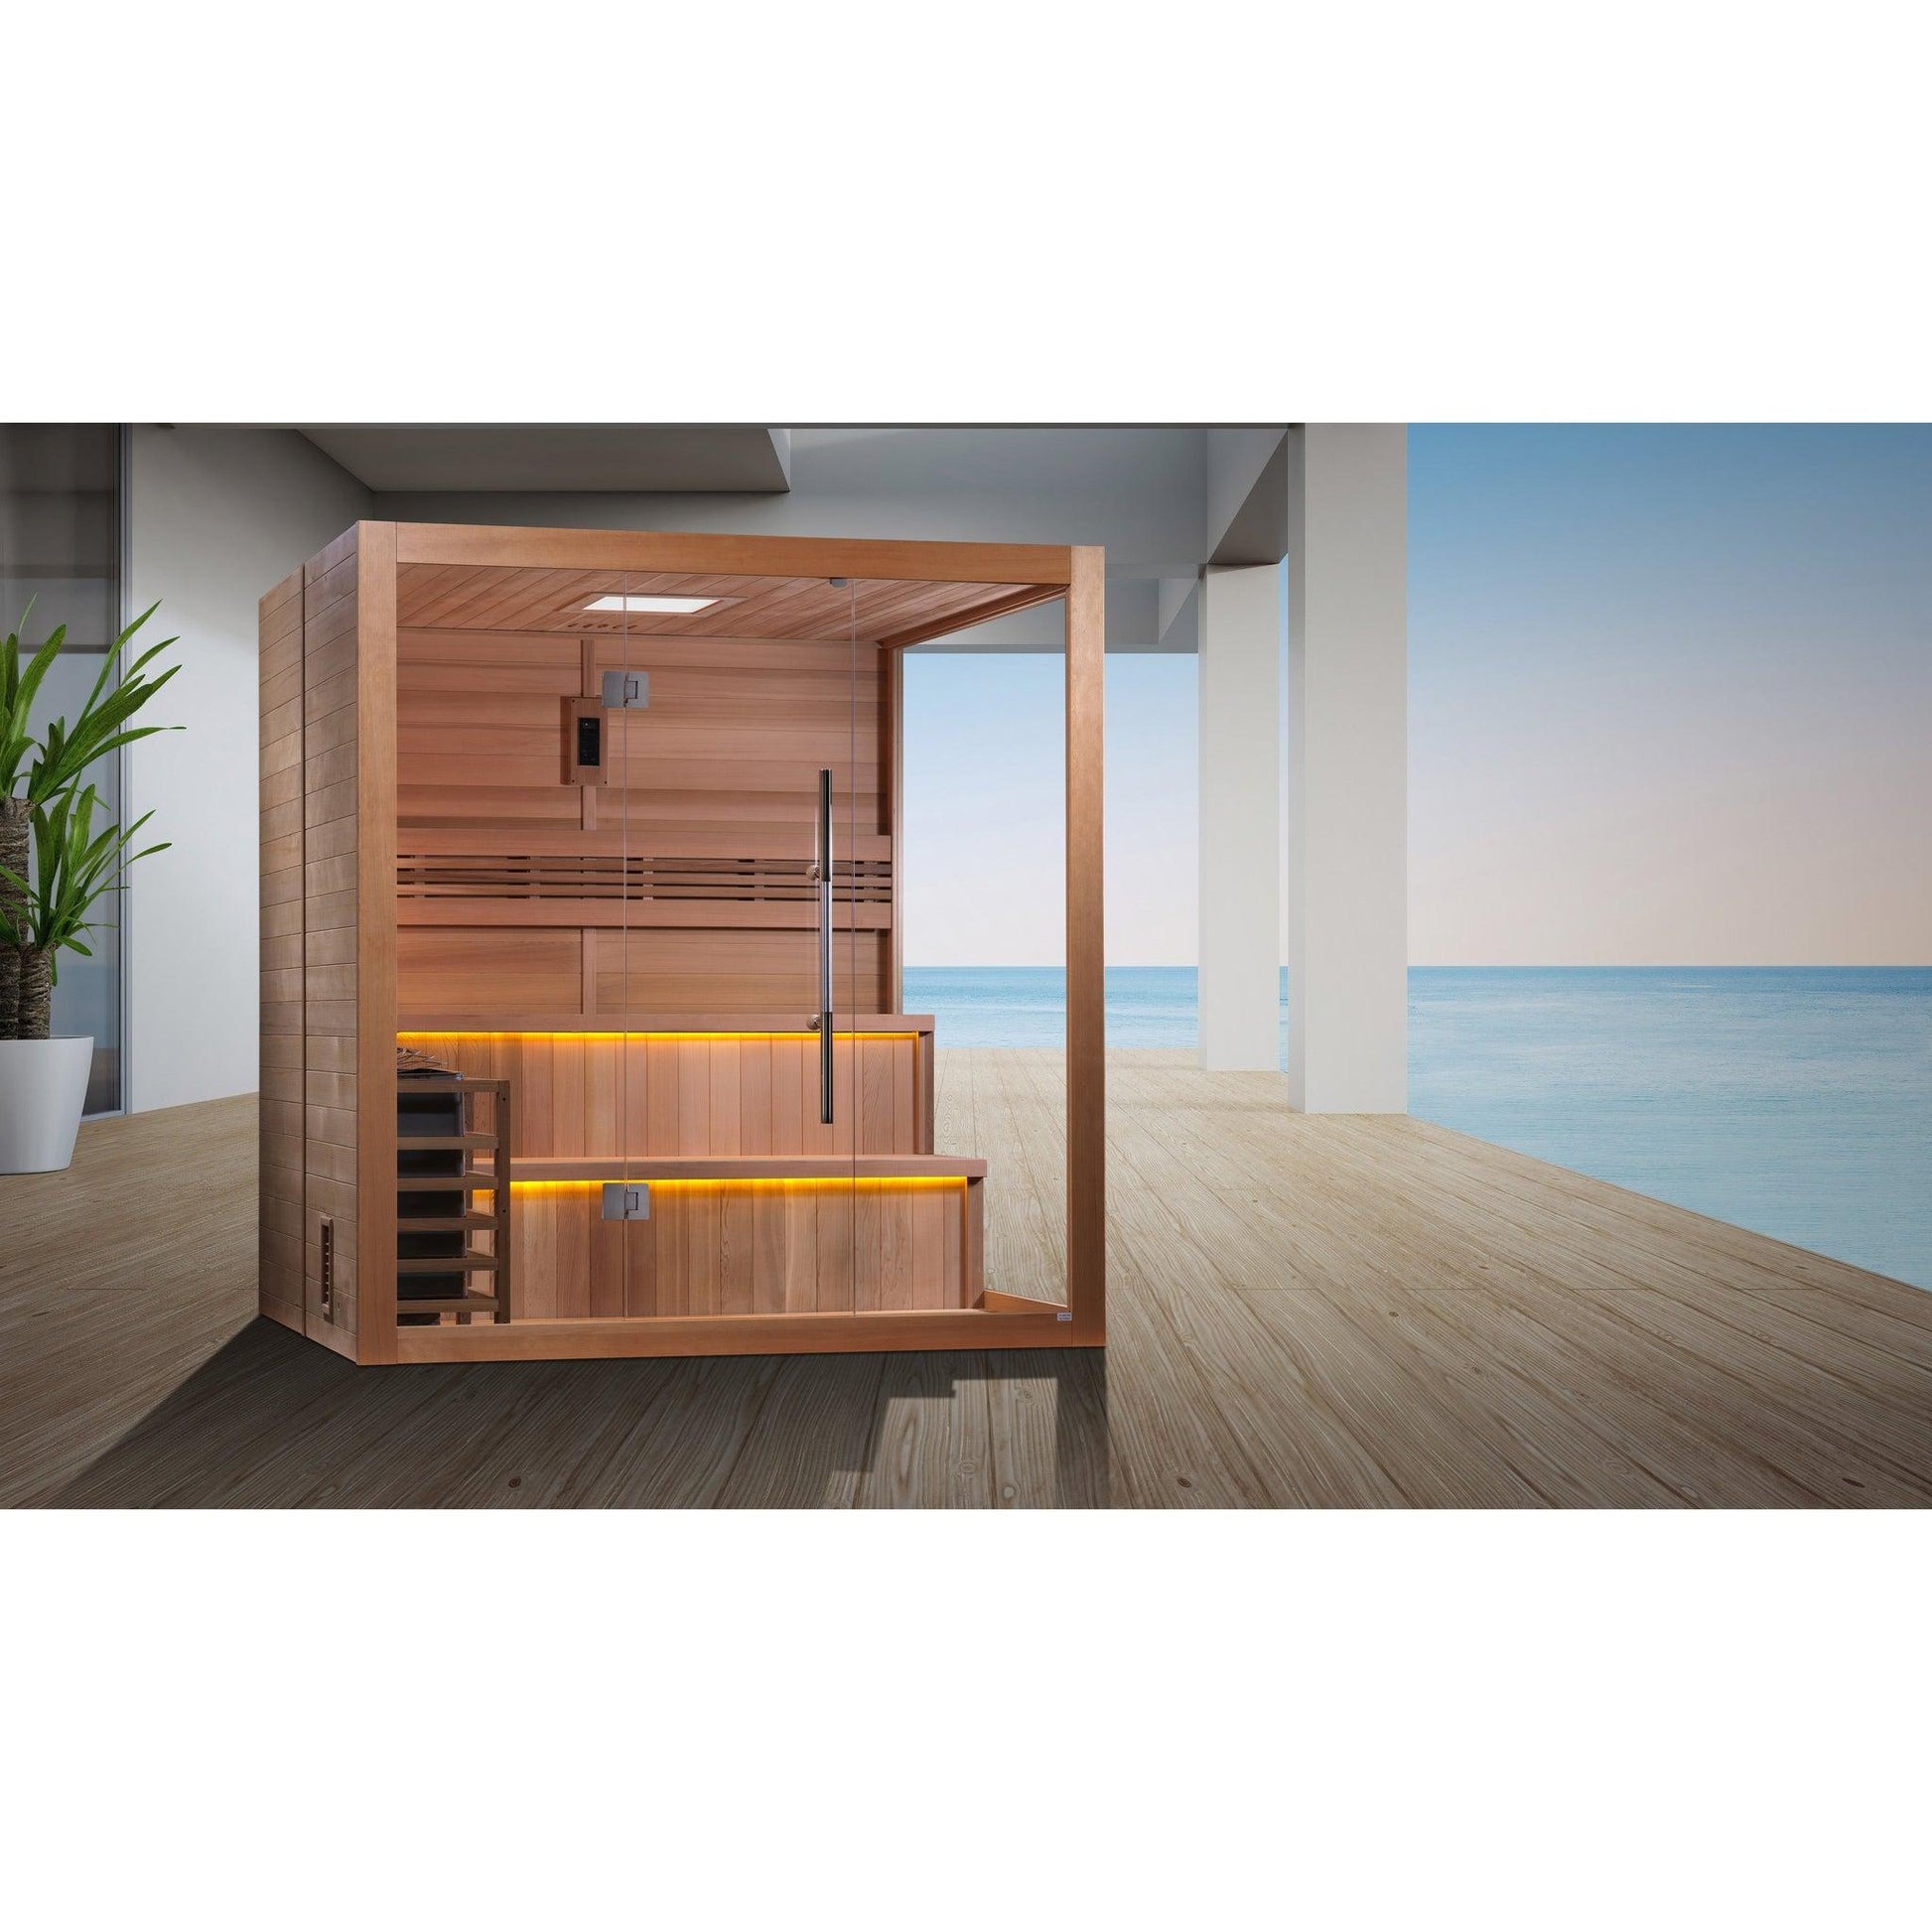 Golden Designs Kuusamo Edition 6-Person Indoor Traditional Steam Sauna All Glass Front and Wooden Right Side Wall in Canadian Red Cedar Interior and Hemlock Exterior